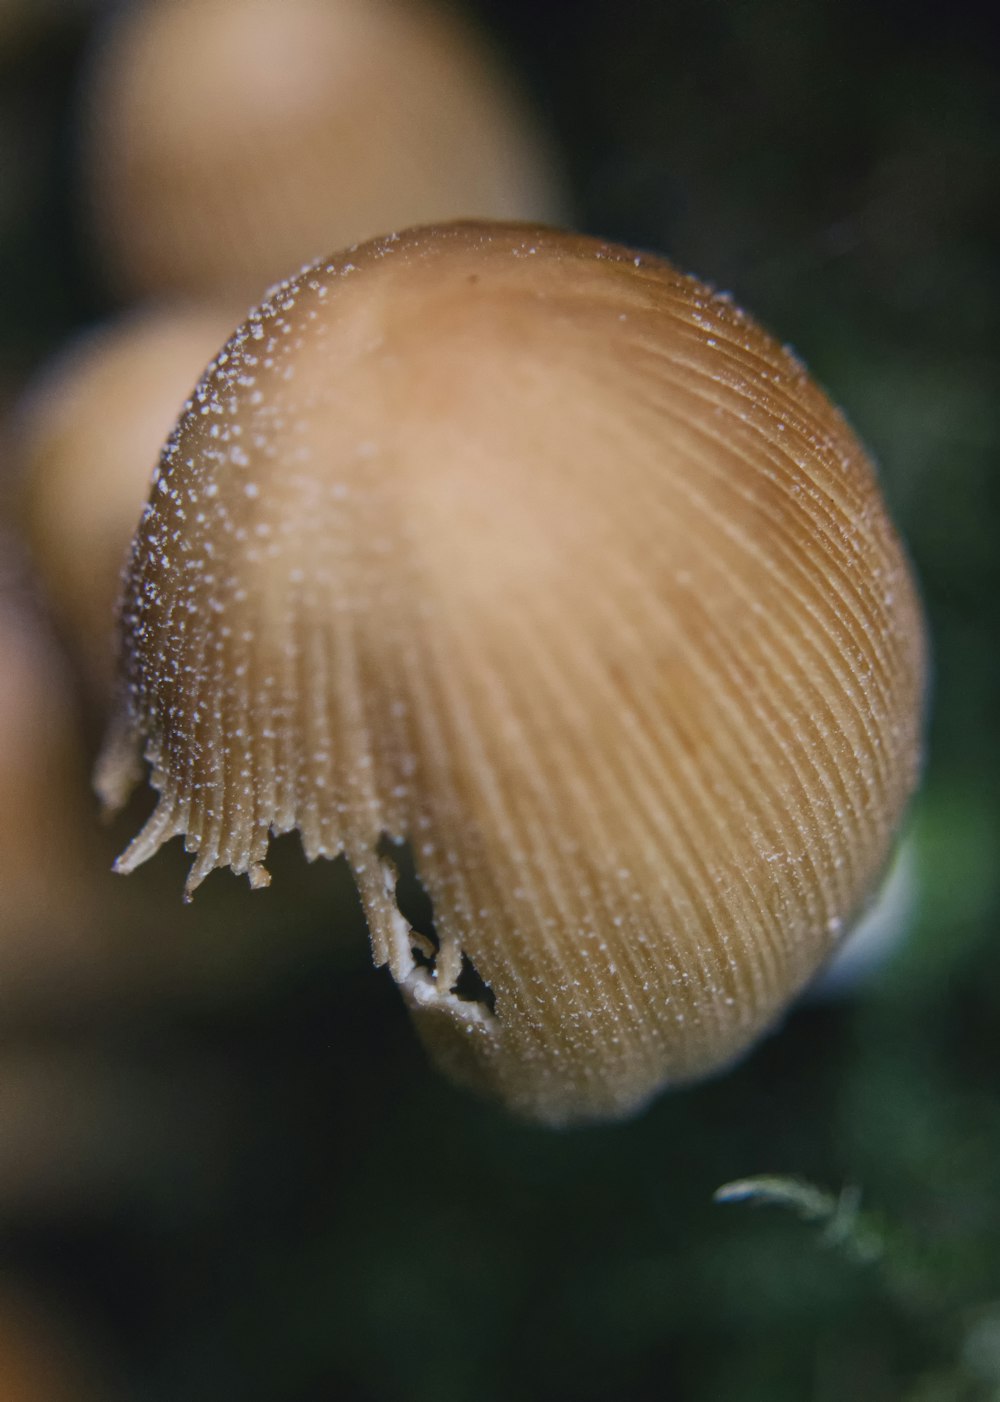 a close up of a group of mushrooms